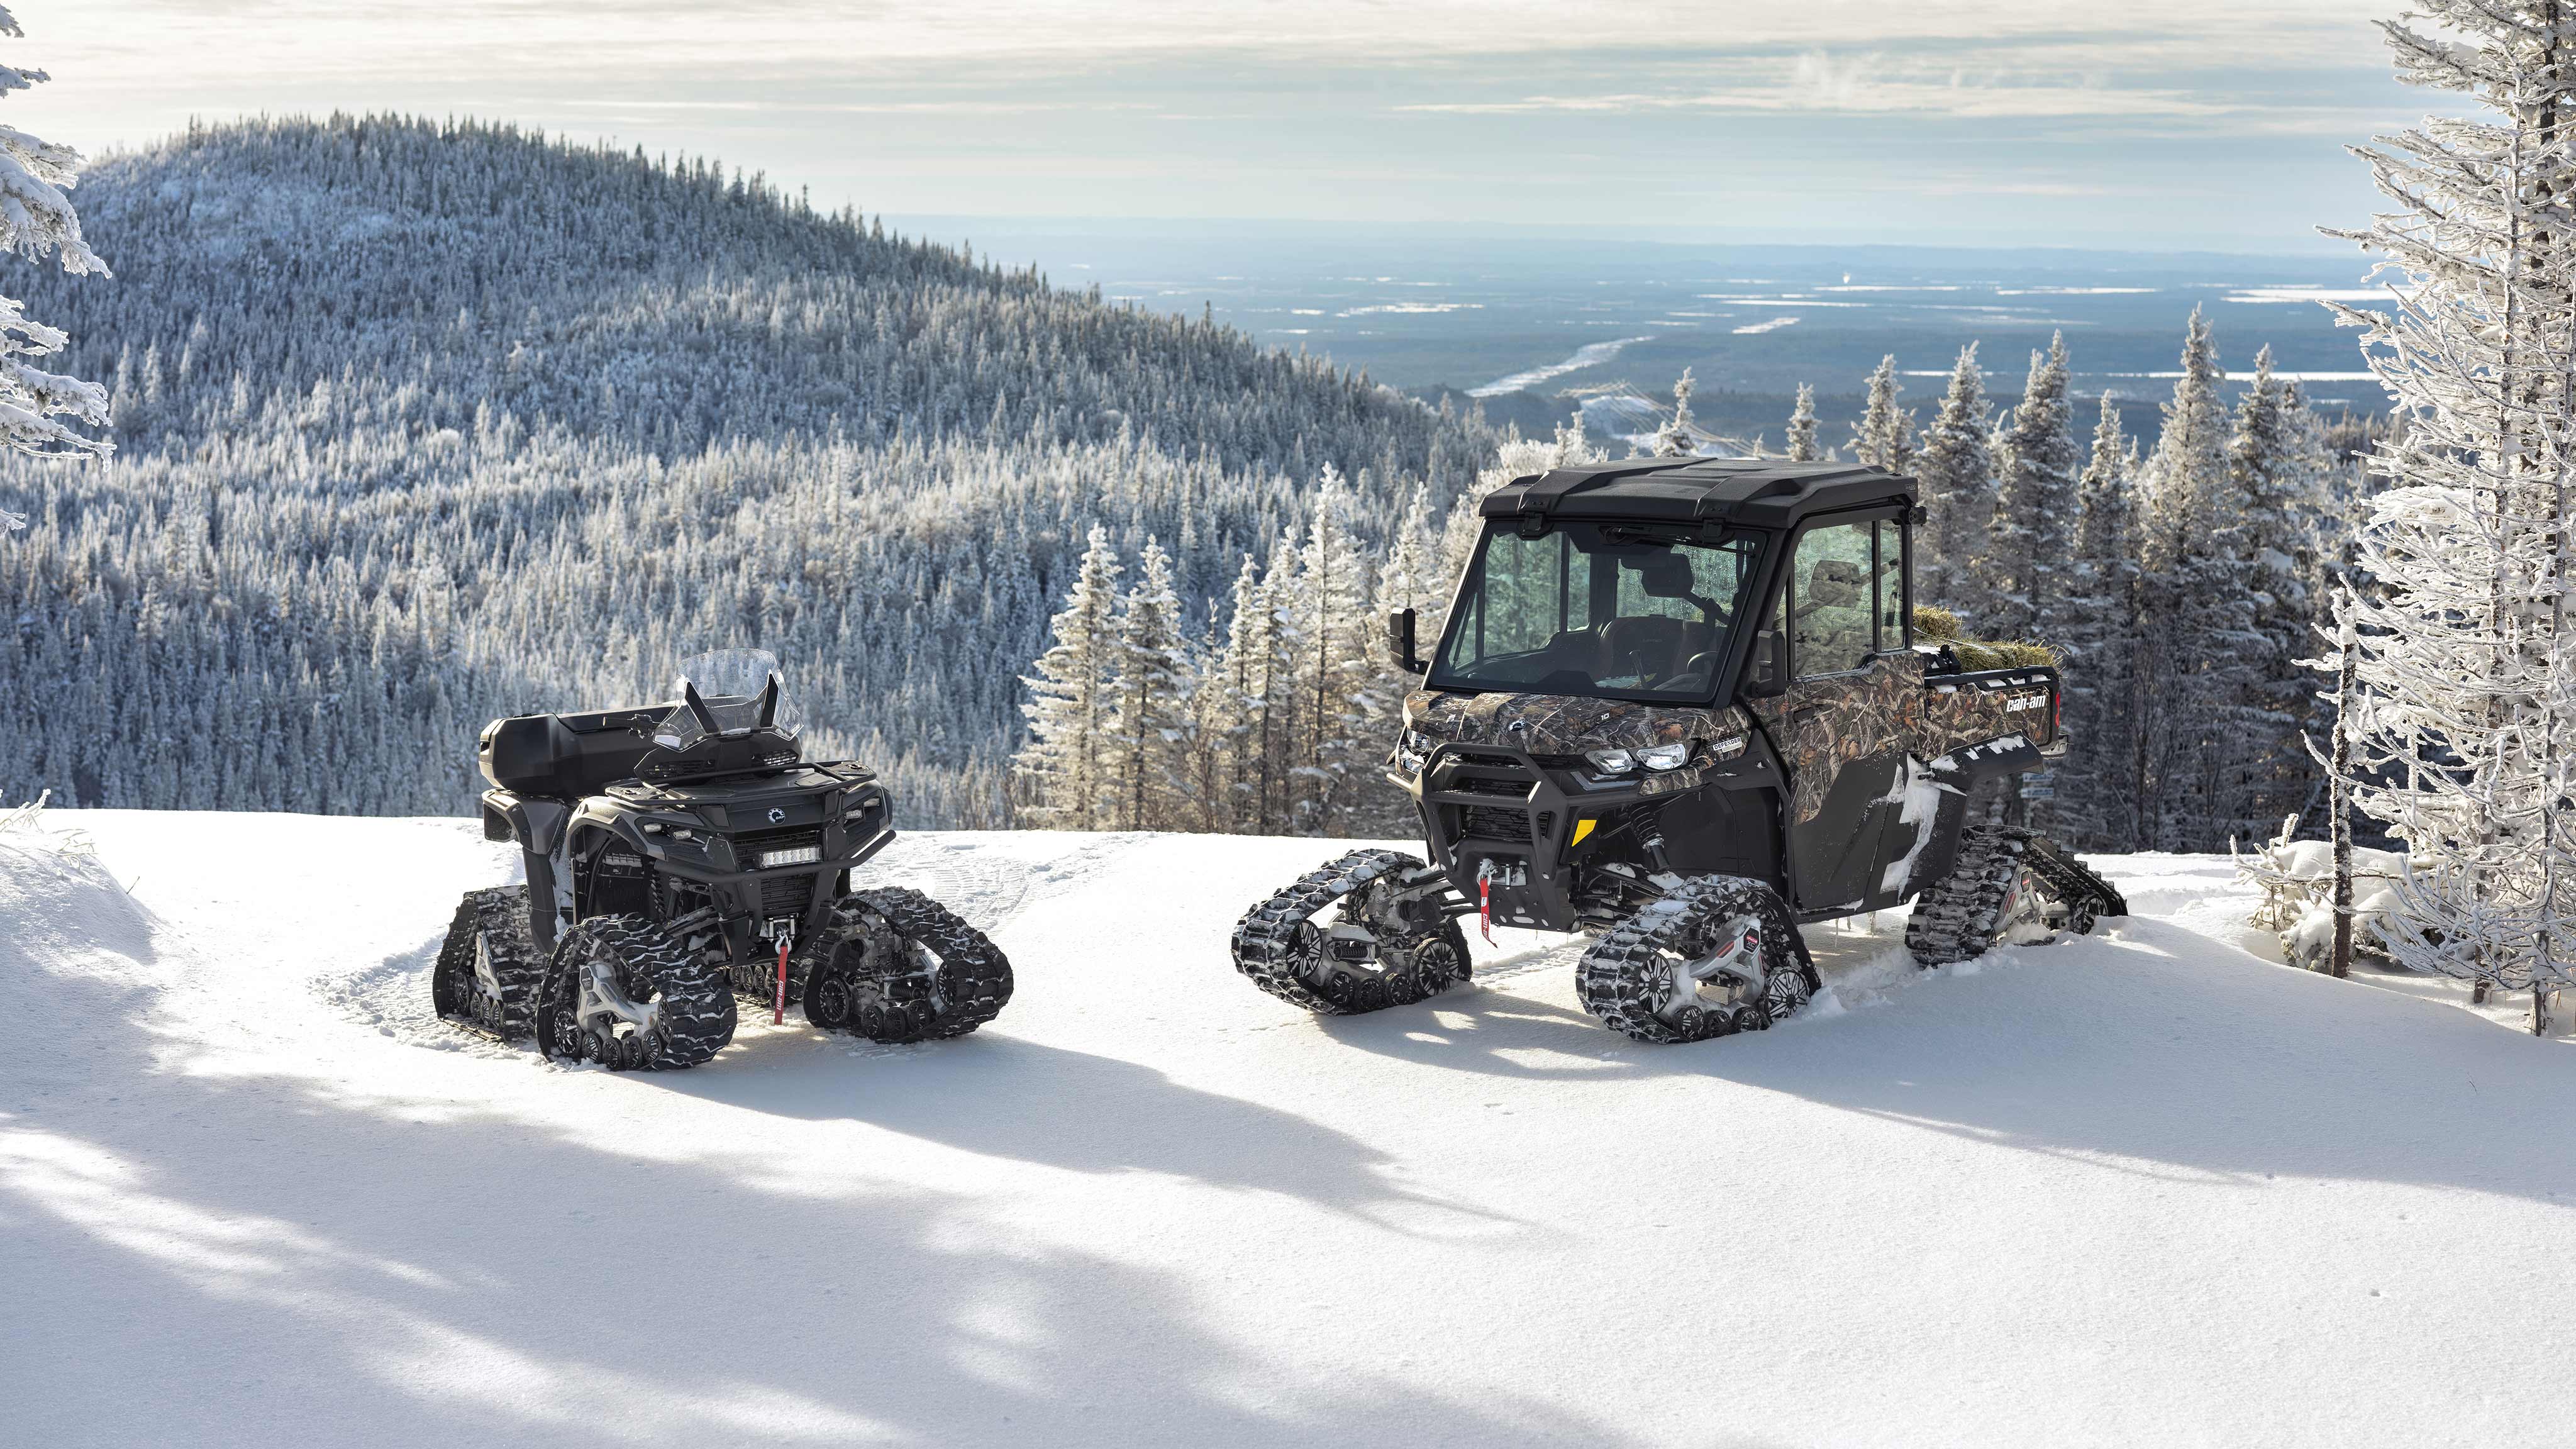 Two Can-Am Off-Road vehicles equipped with Apache track system on top of a snowy mountain